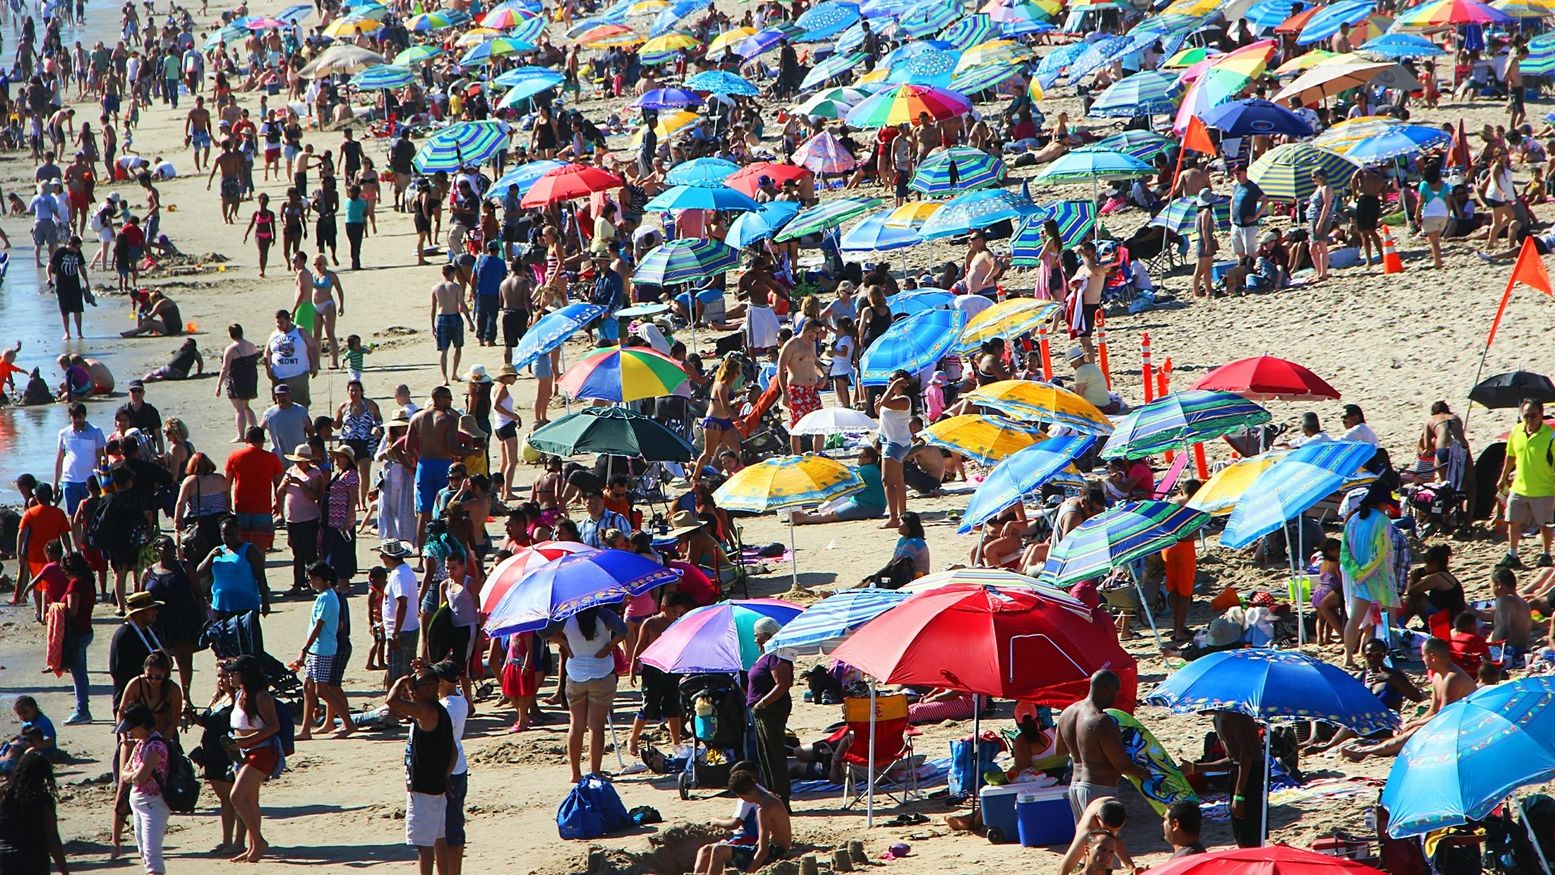 Crowded beach pictured.